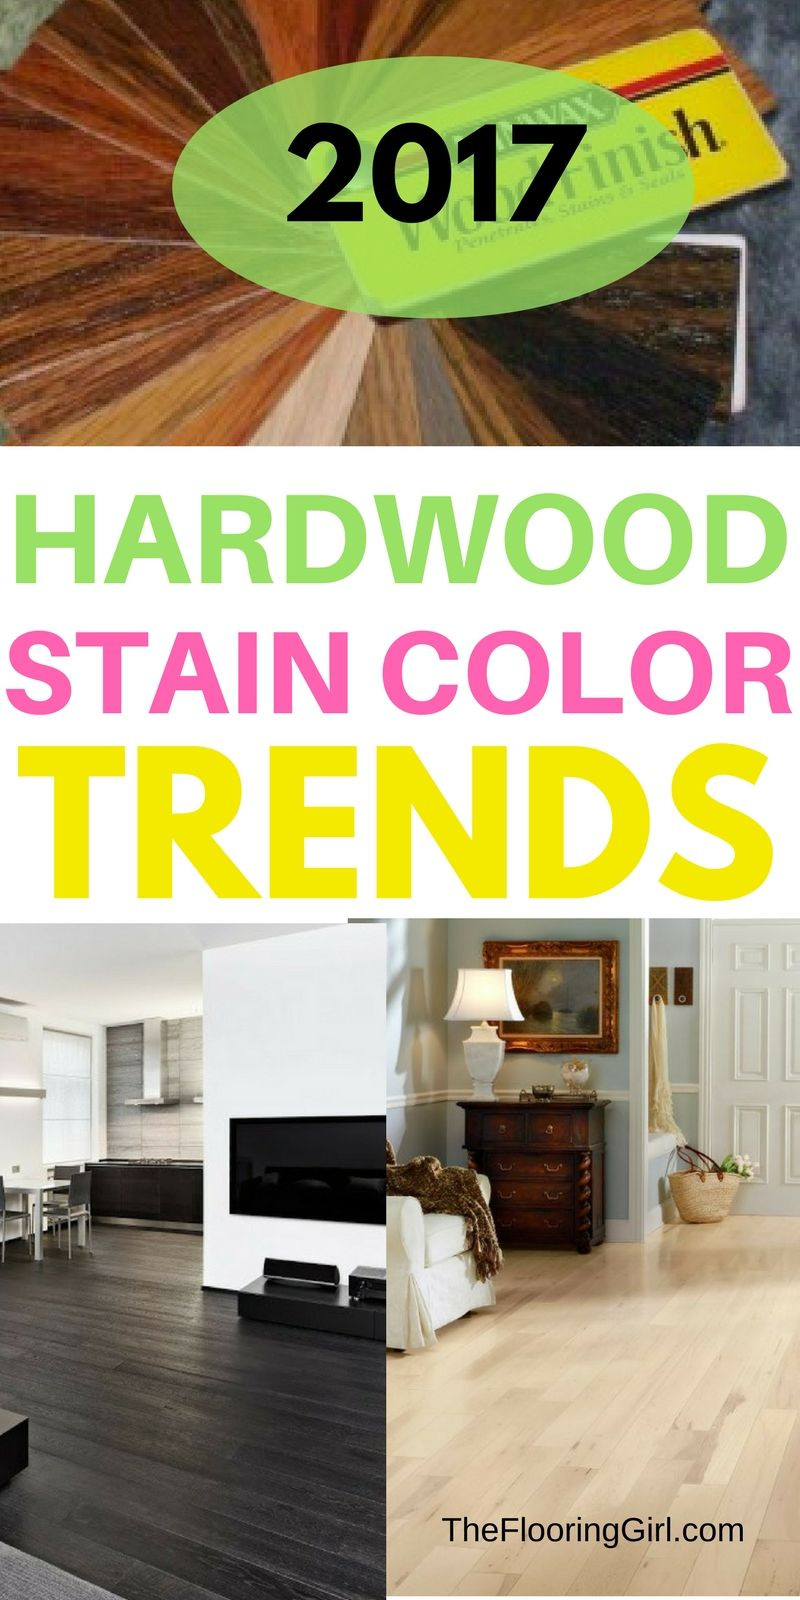 19 attractive Hardwood Floor Refinishing Jobs 2024 free download hardwood floor refinishing jobs of hardwood flooring stain color trends 2018 more from the flooring in hardwood flooring stain color trends for 2017 hardwood colors that are in style thefloo